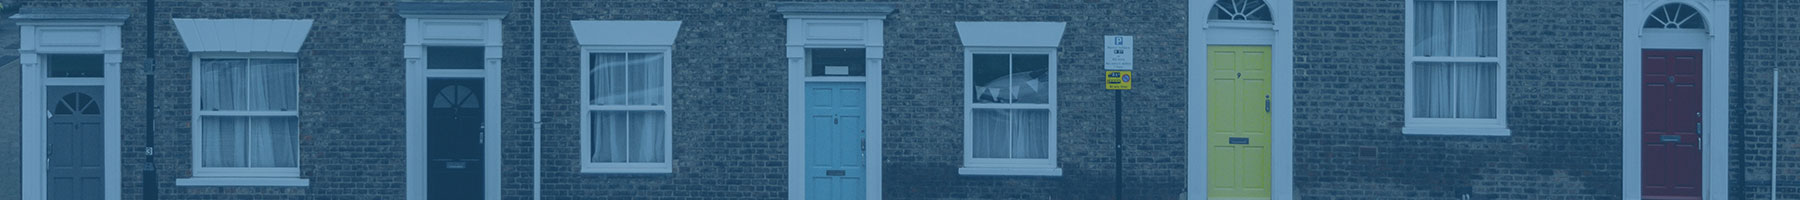 Bird & Co. Solicitors Banner Image